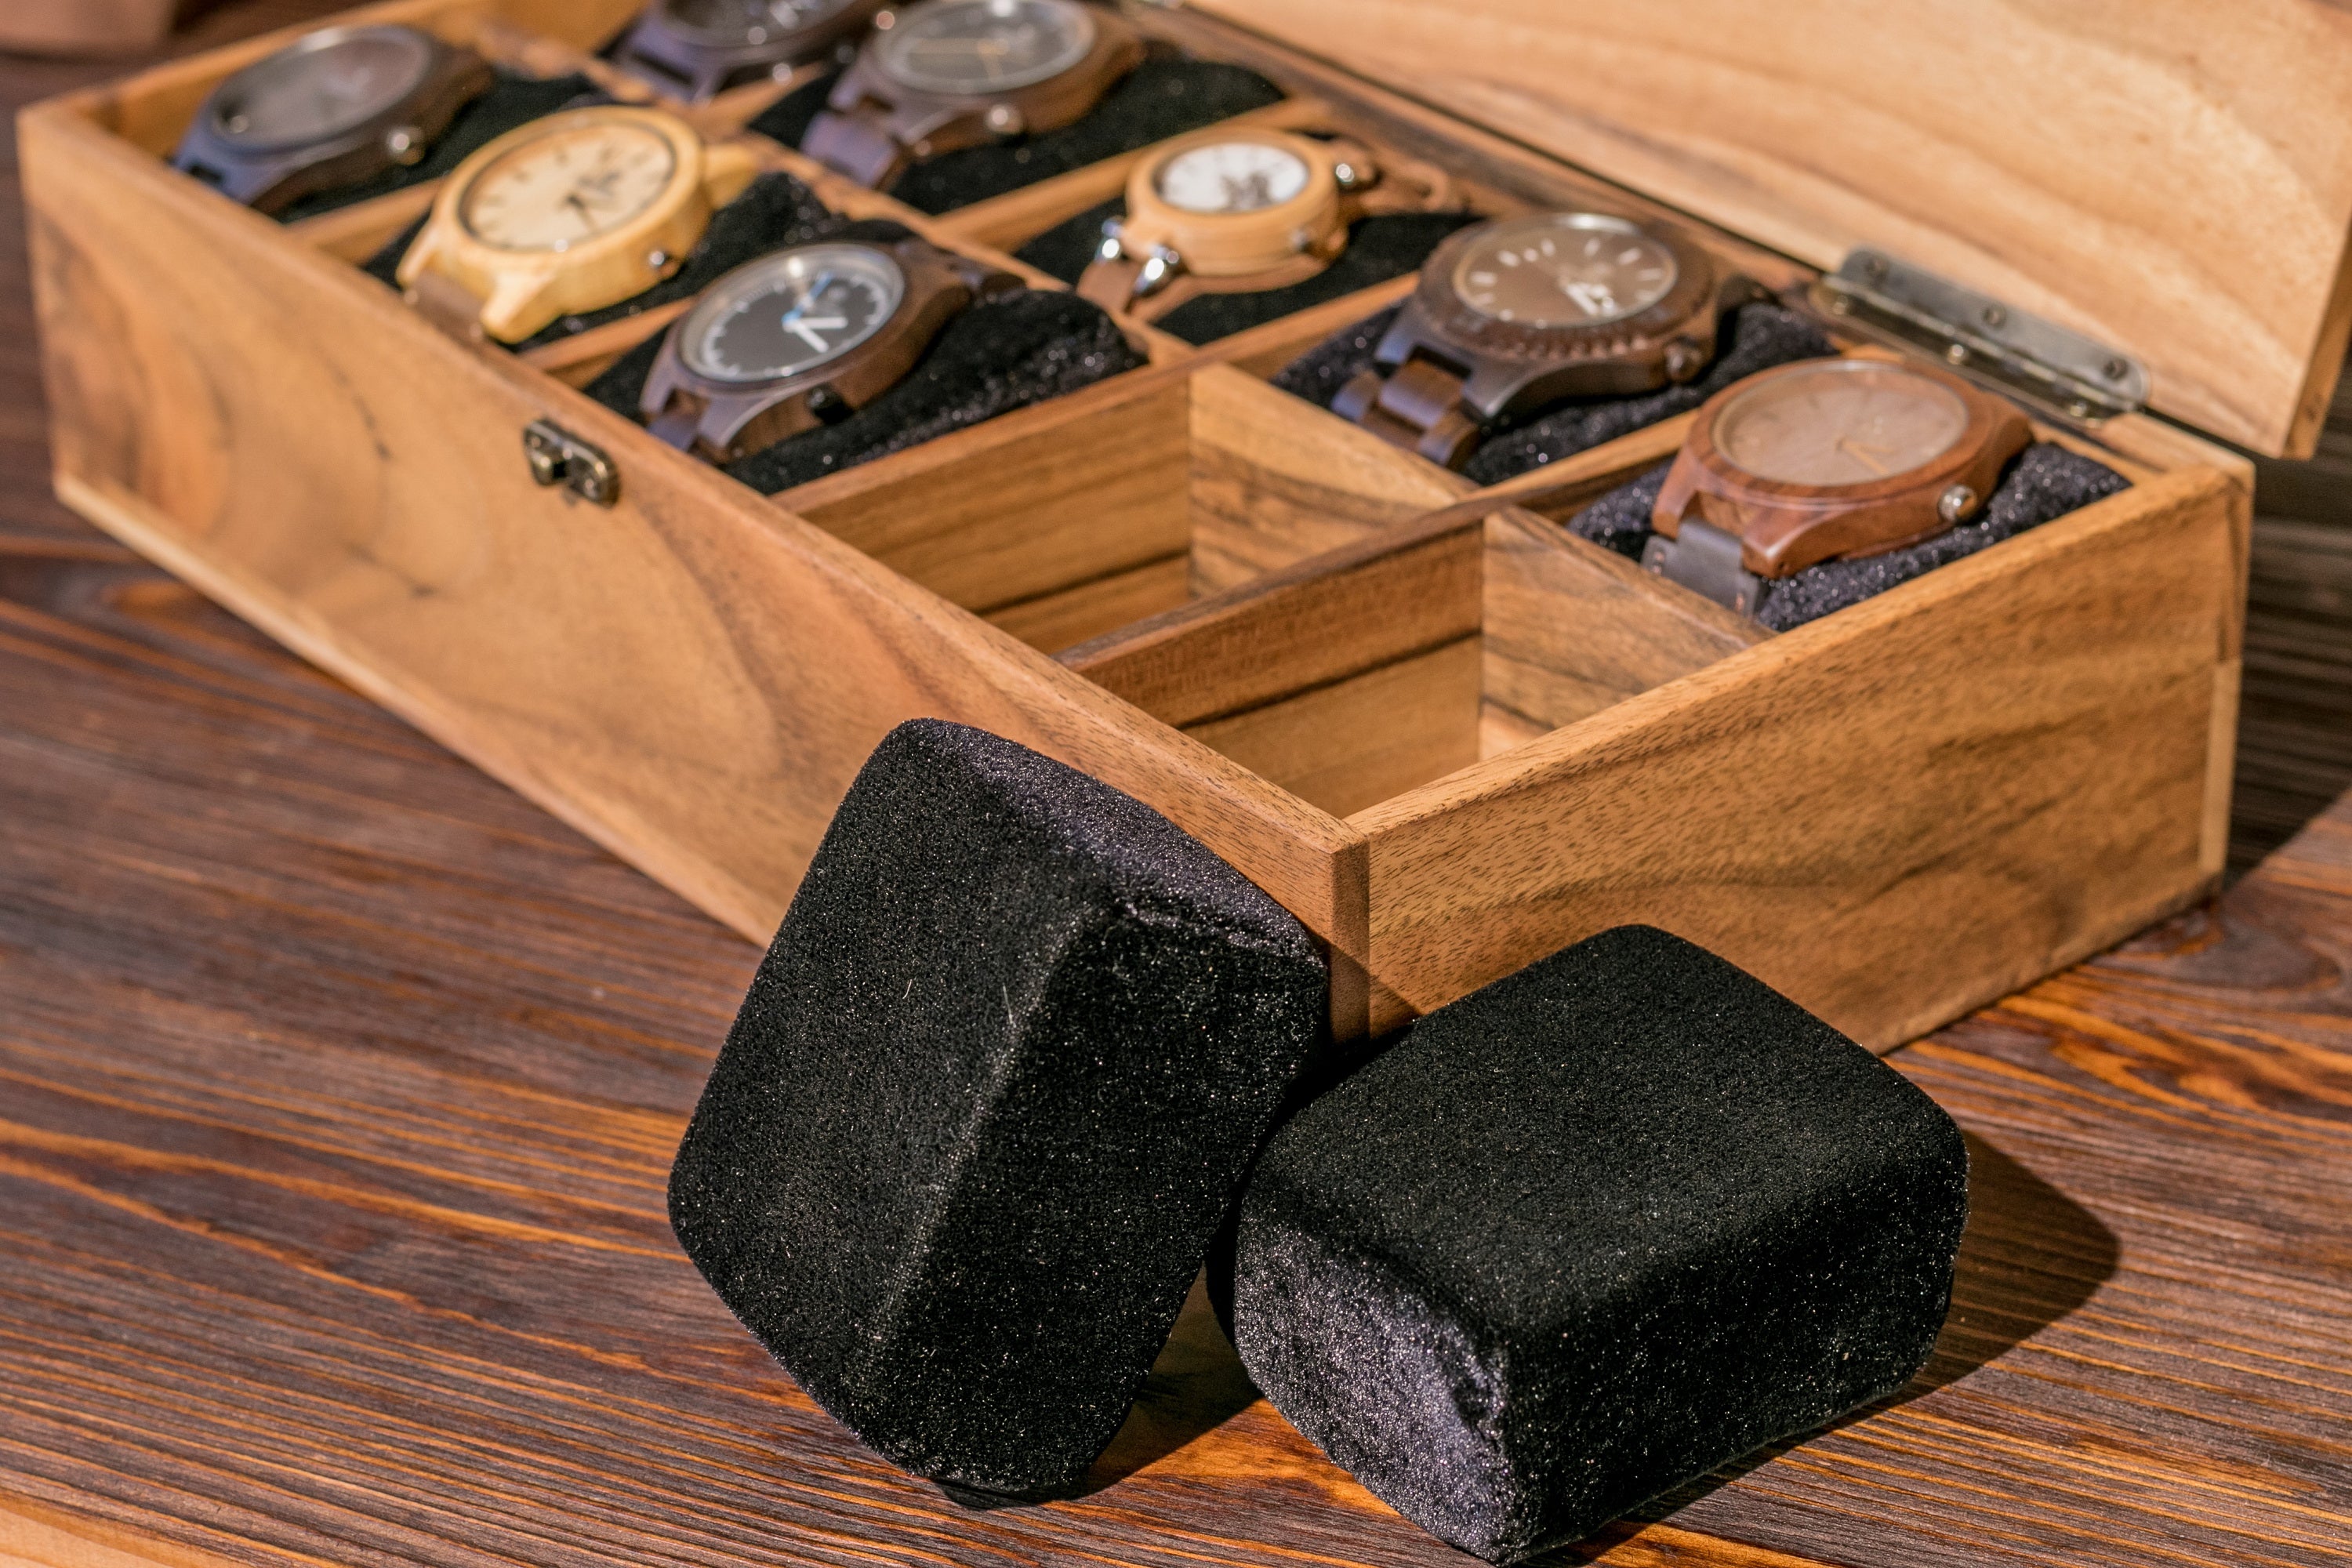 Watch Box by SkinWood - 10 Watches